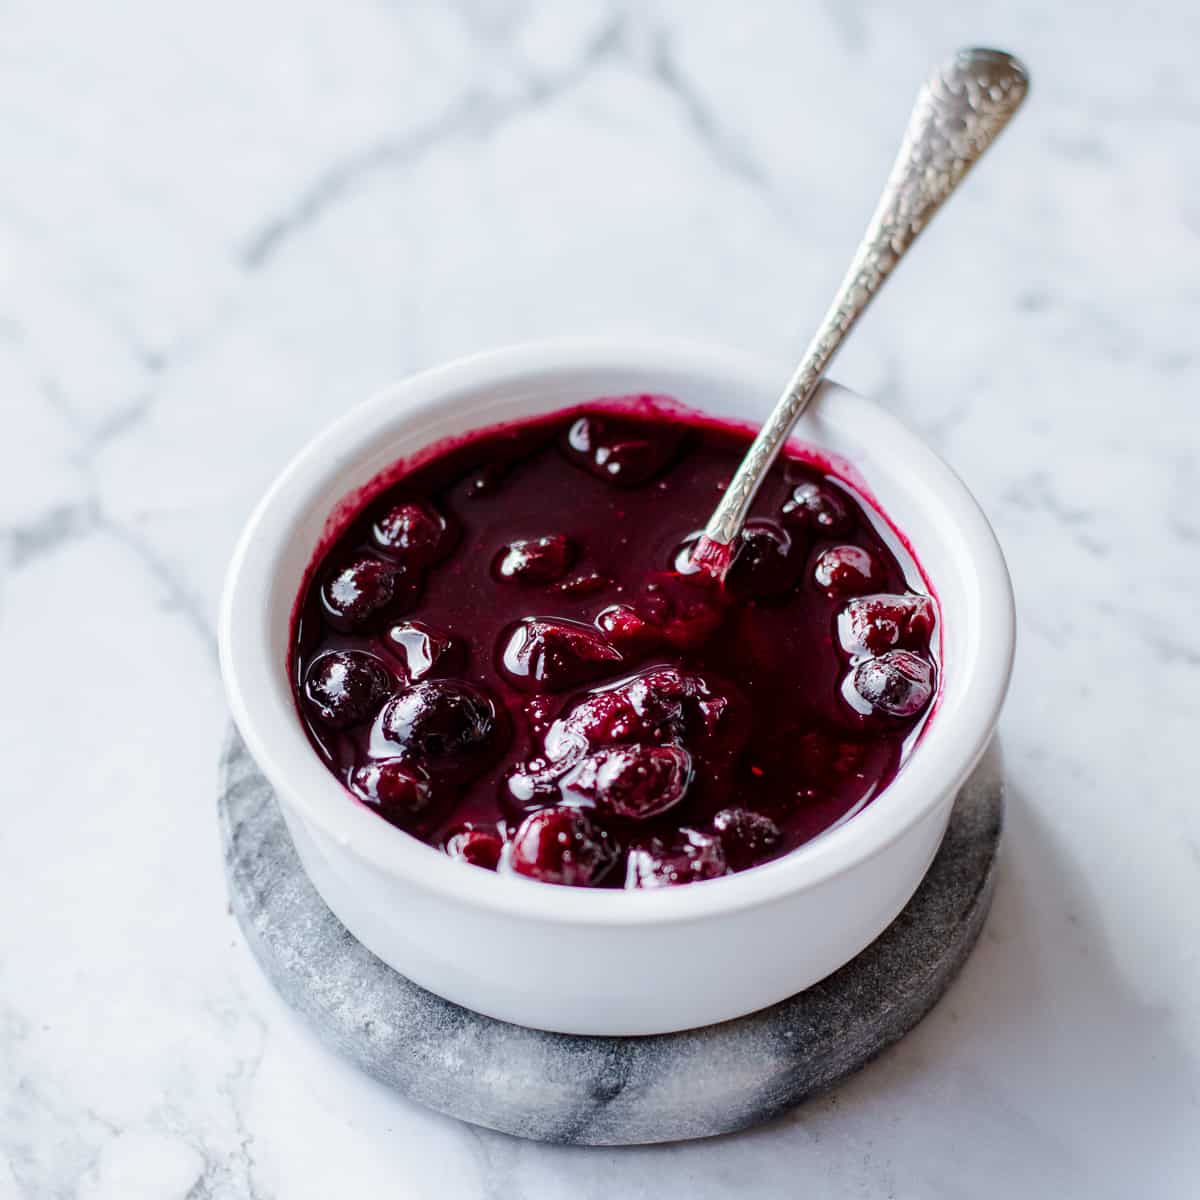 Homemade Blueberry Compote in white bowl with spoon